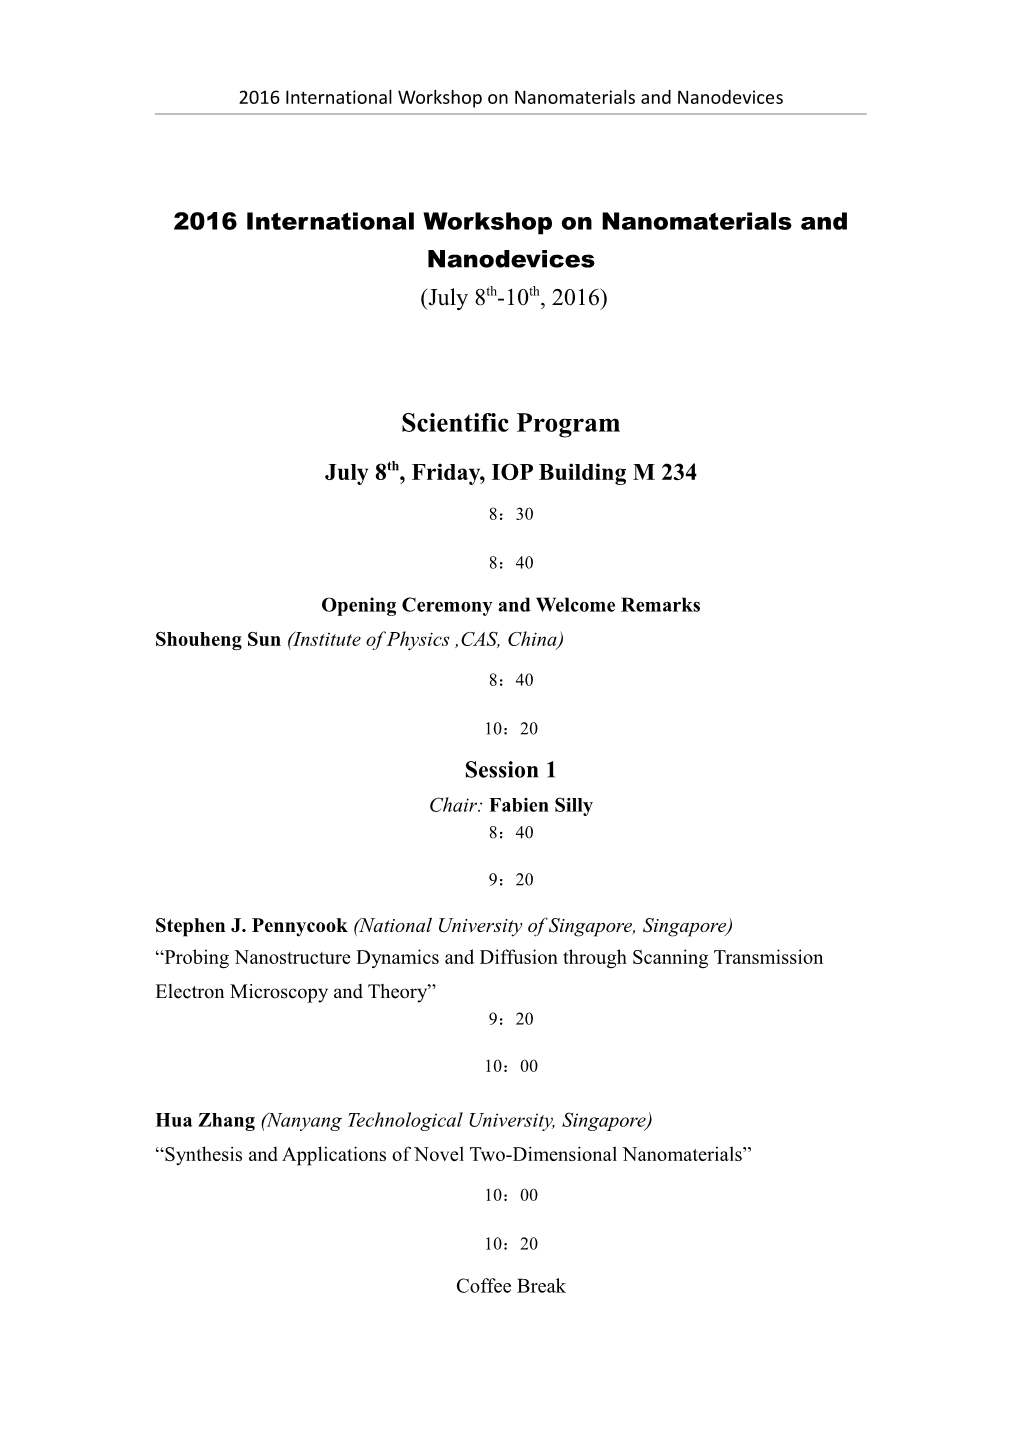 2016 International Workshop on Nanomaterials and Nanodevices